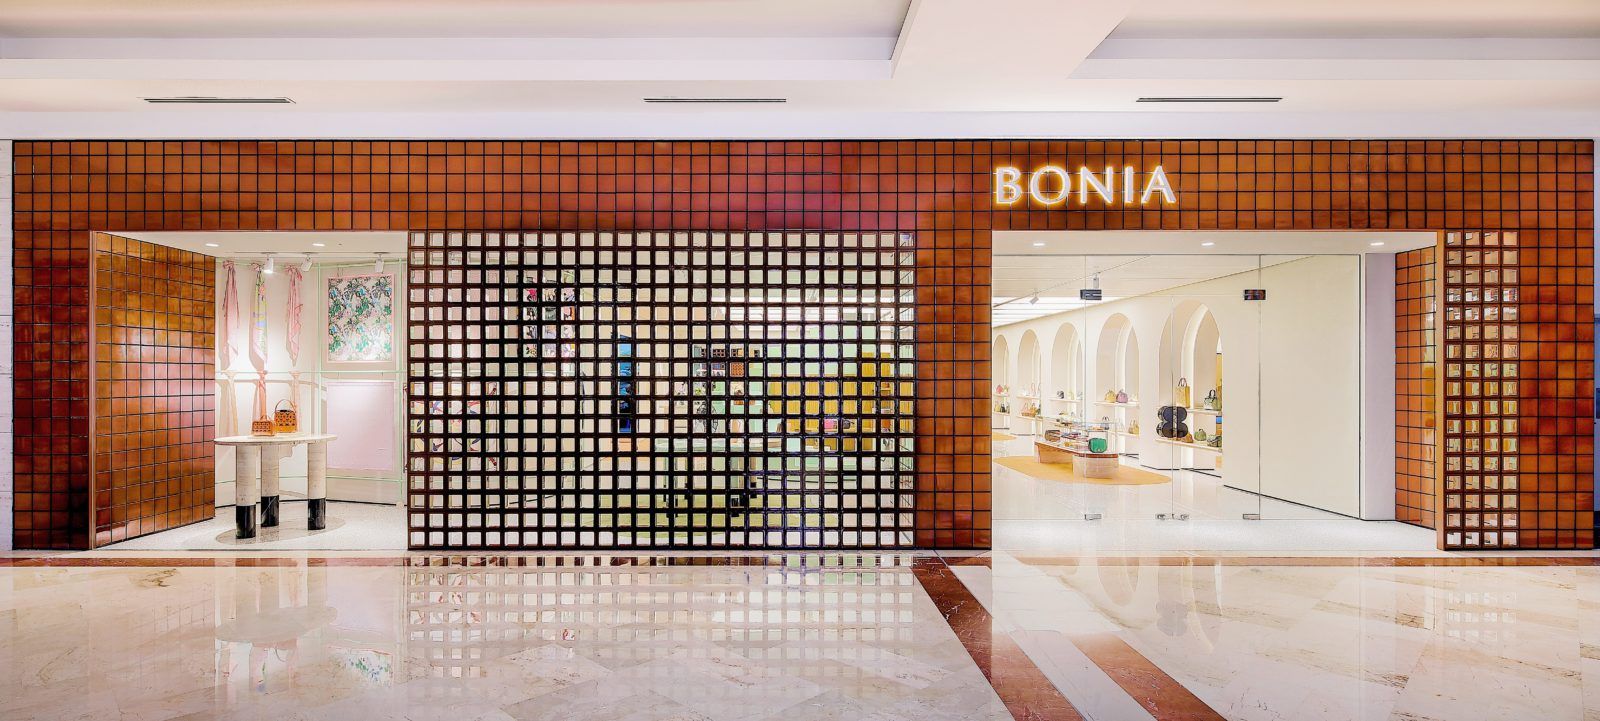 The @bonia__official flagship store is now open! The first 100